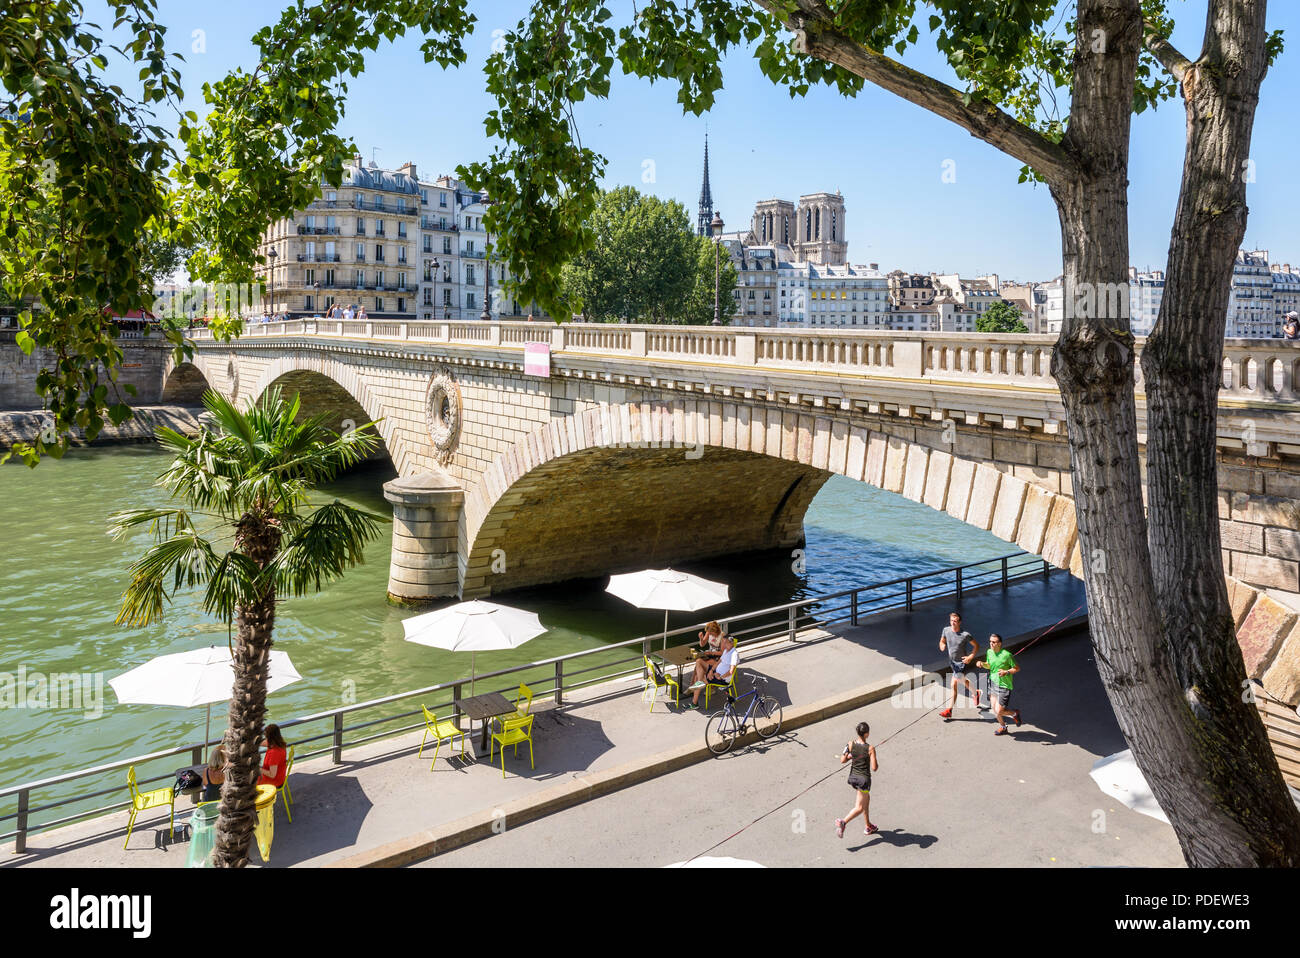 People go jogging or have a drink on the banks of the Seine during Paris-Plage summer event, with Notre-Dame de Paris cathedral in the background. Stock Photo